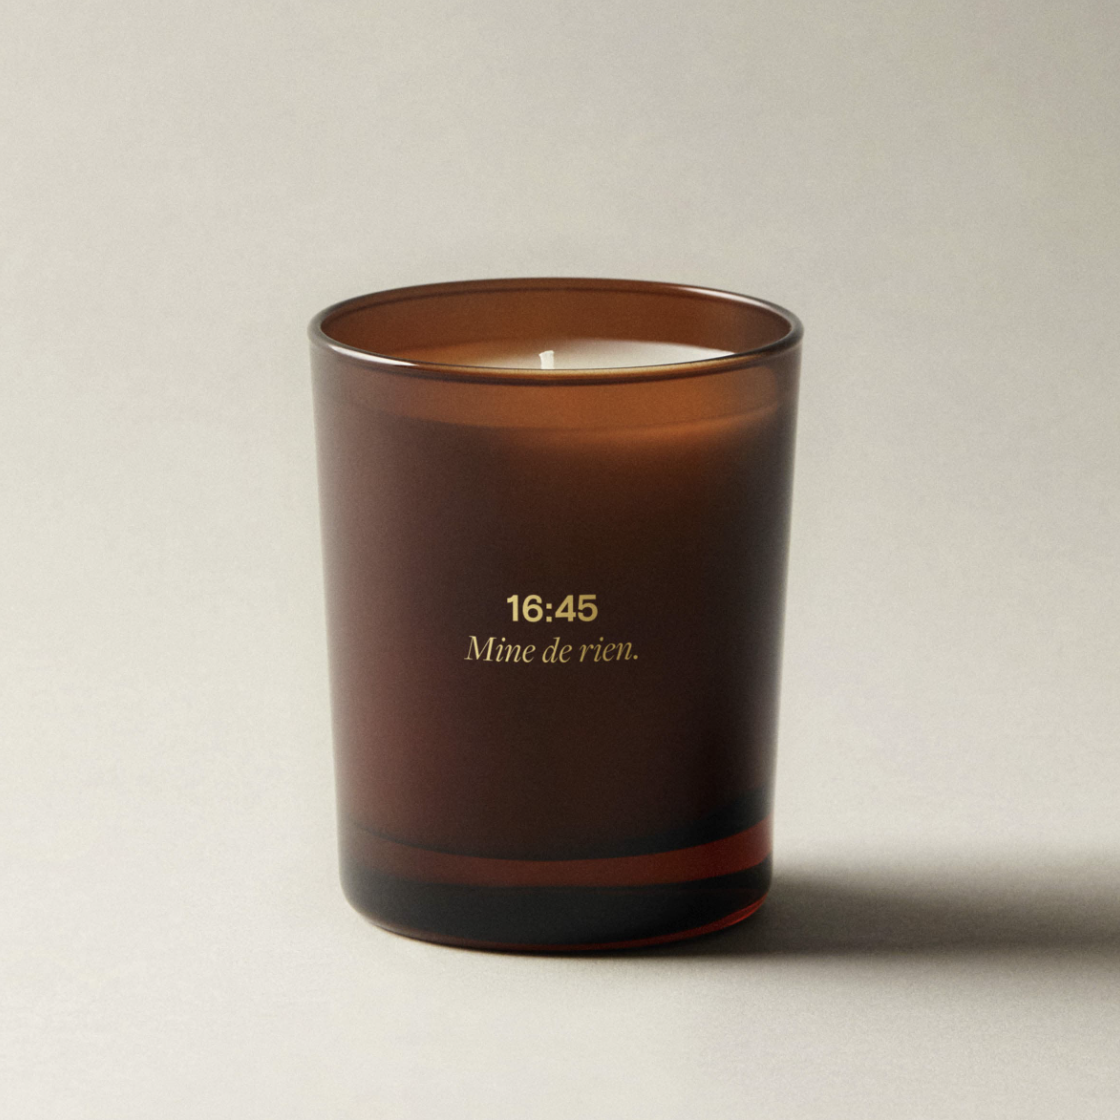 16:45 Mine de rein - Candle by D&#39;ORSAY